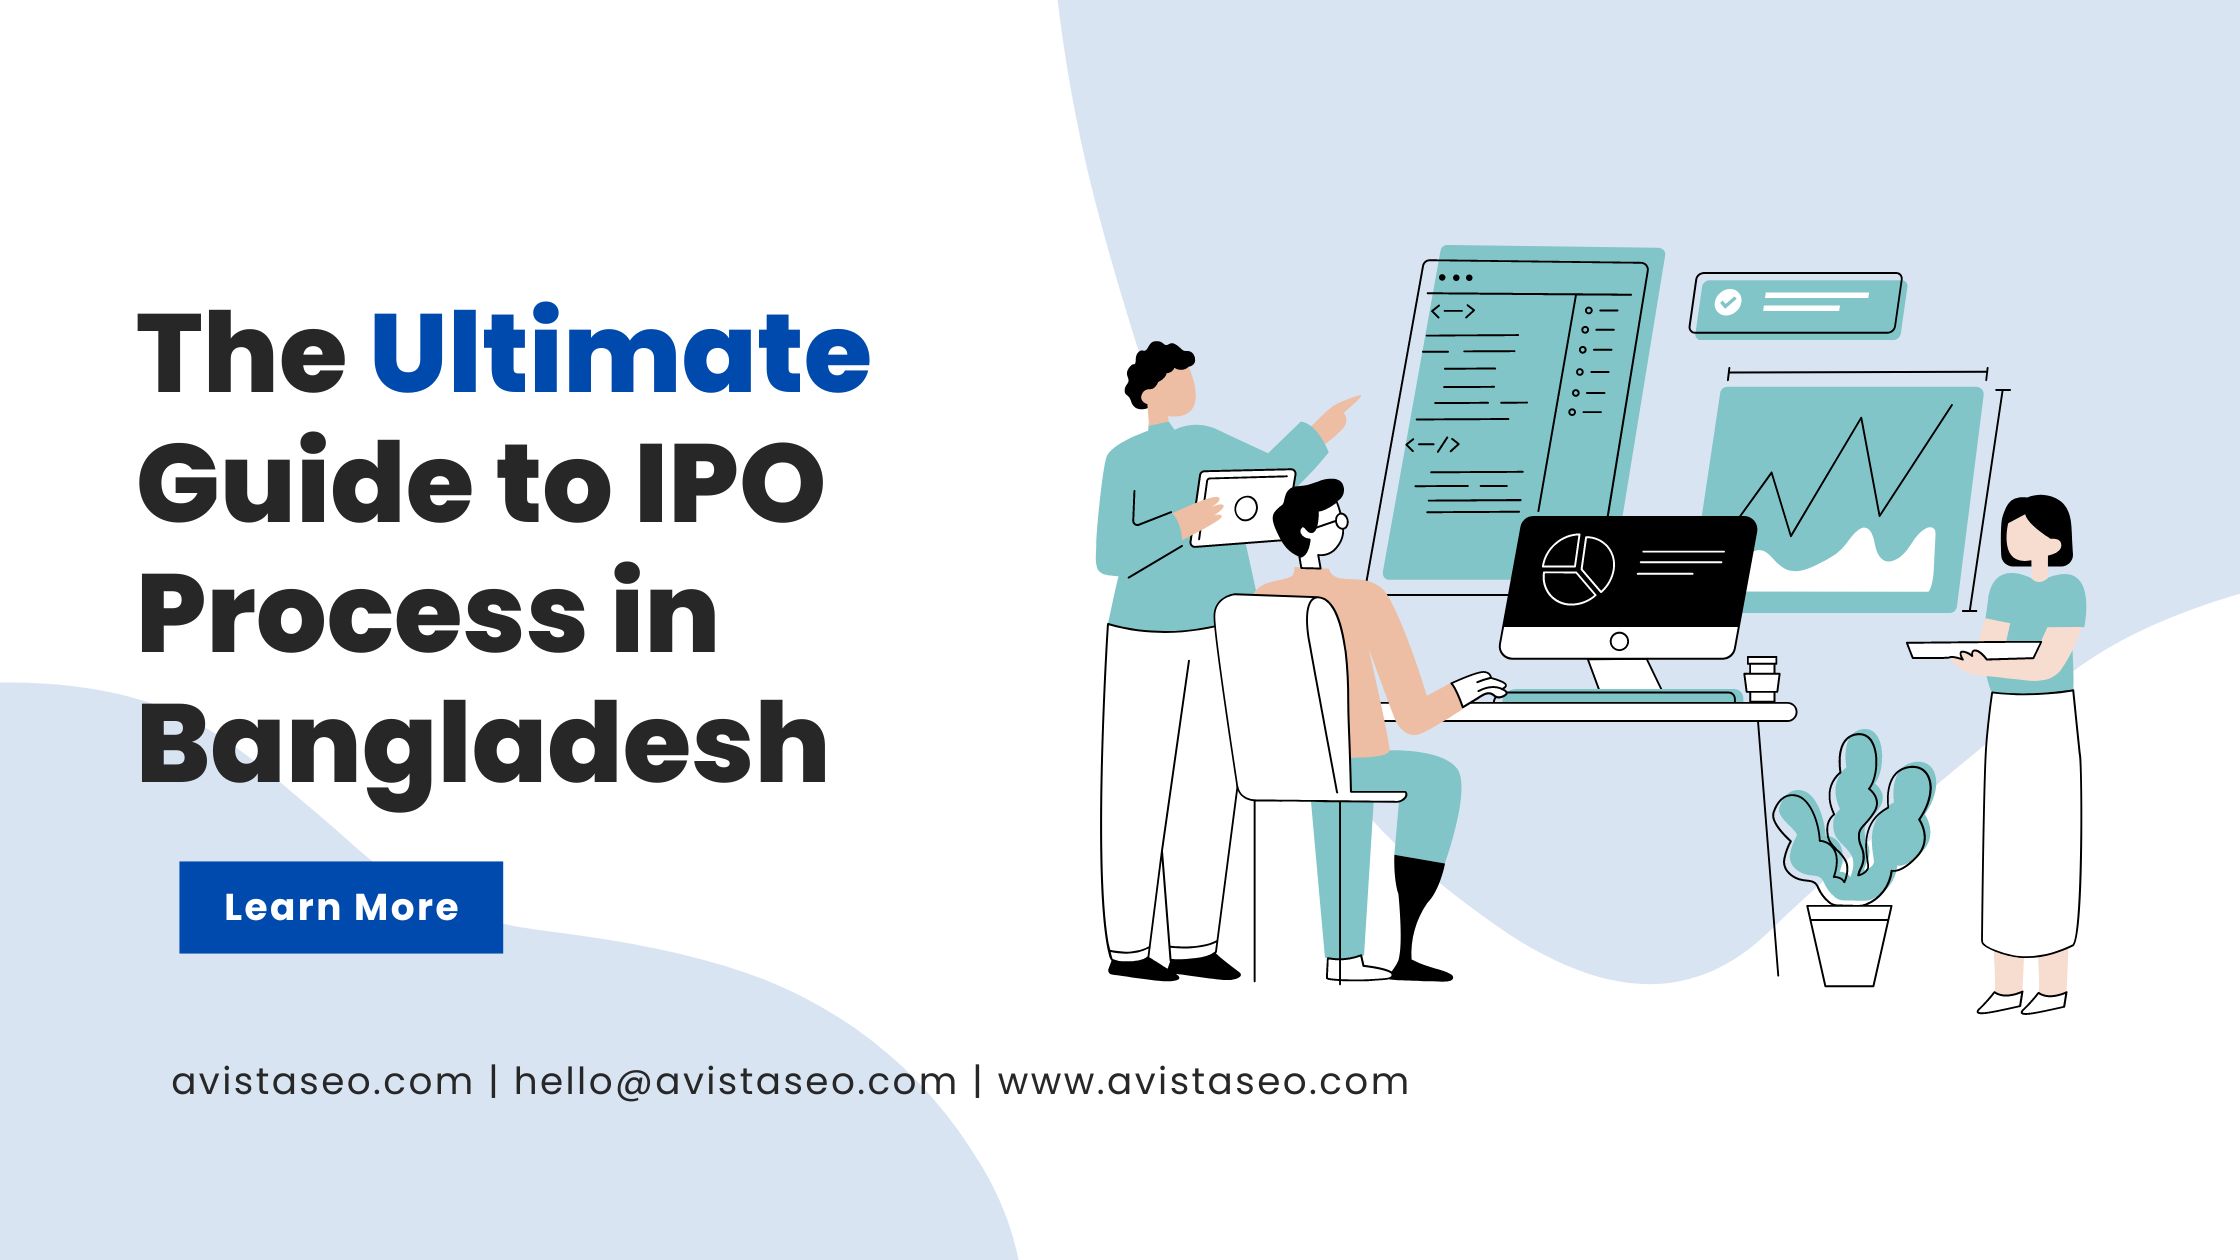 The Ultimate Guide to IPO Process in Bangladesh